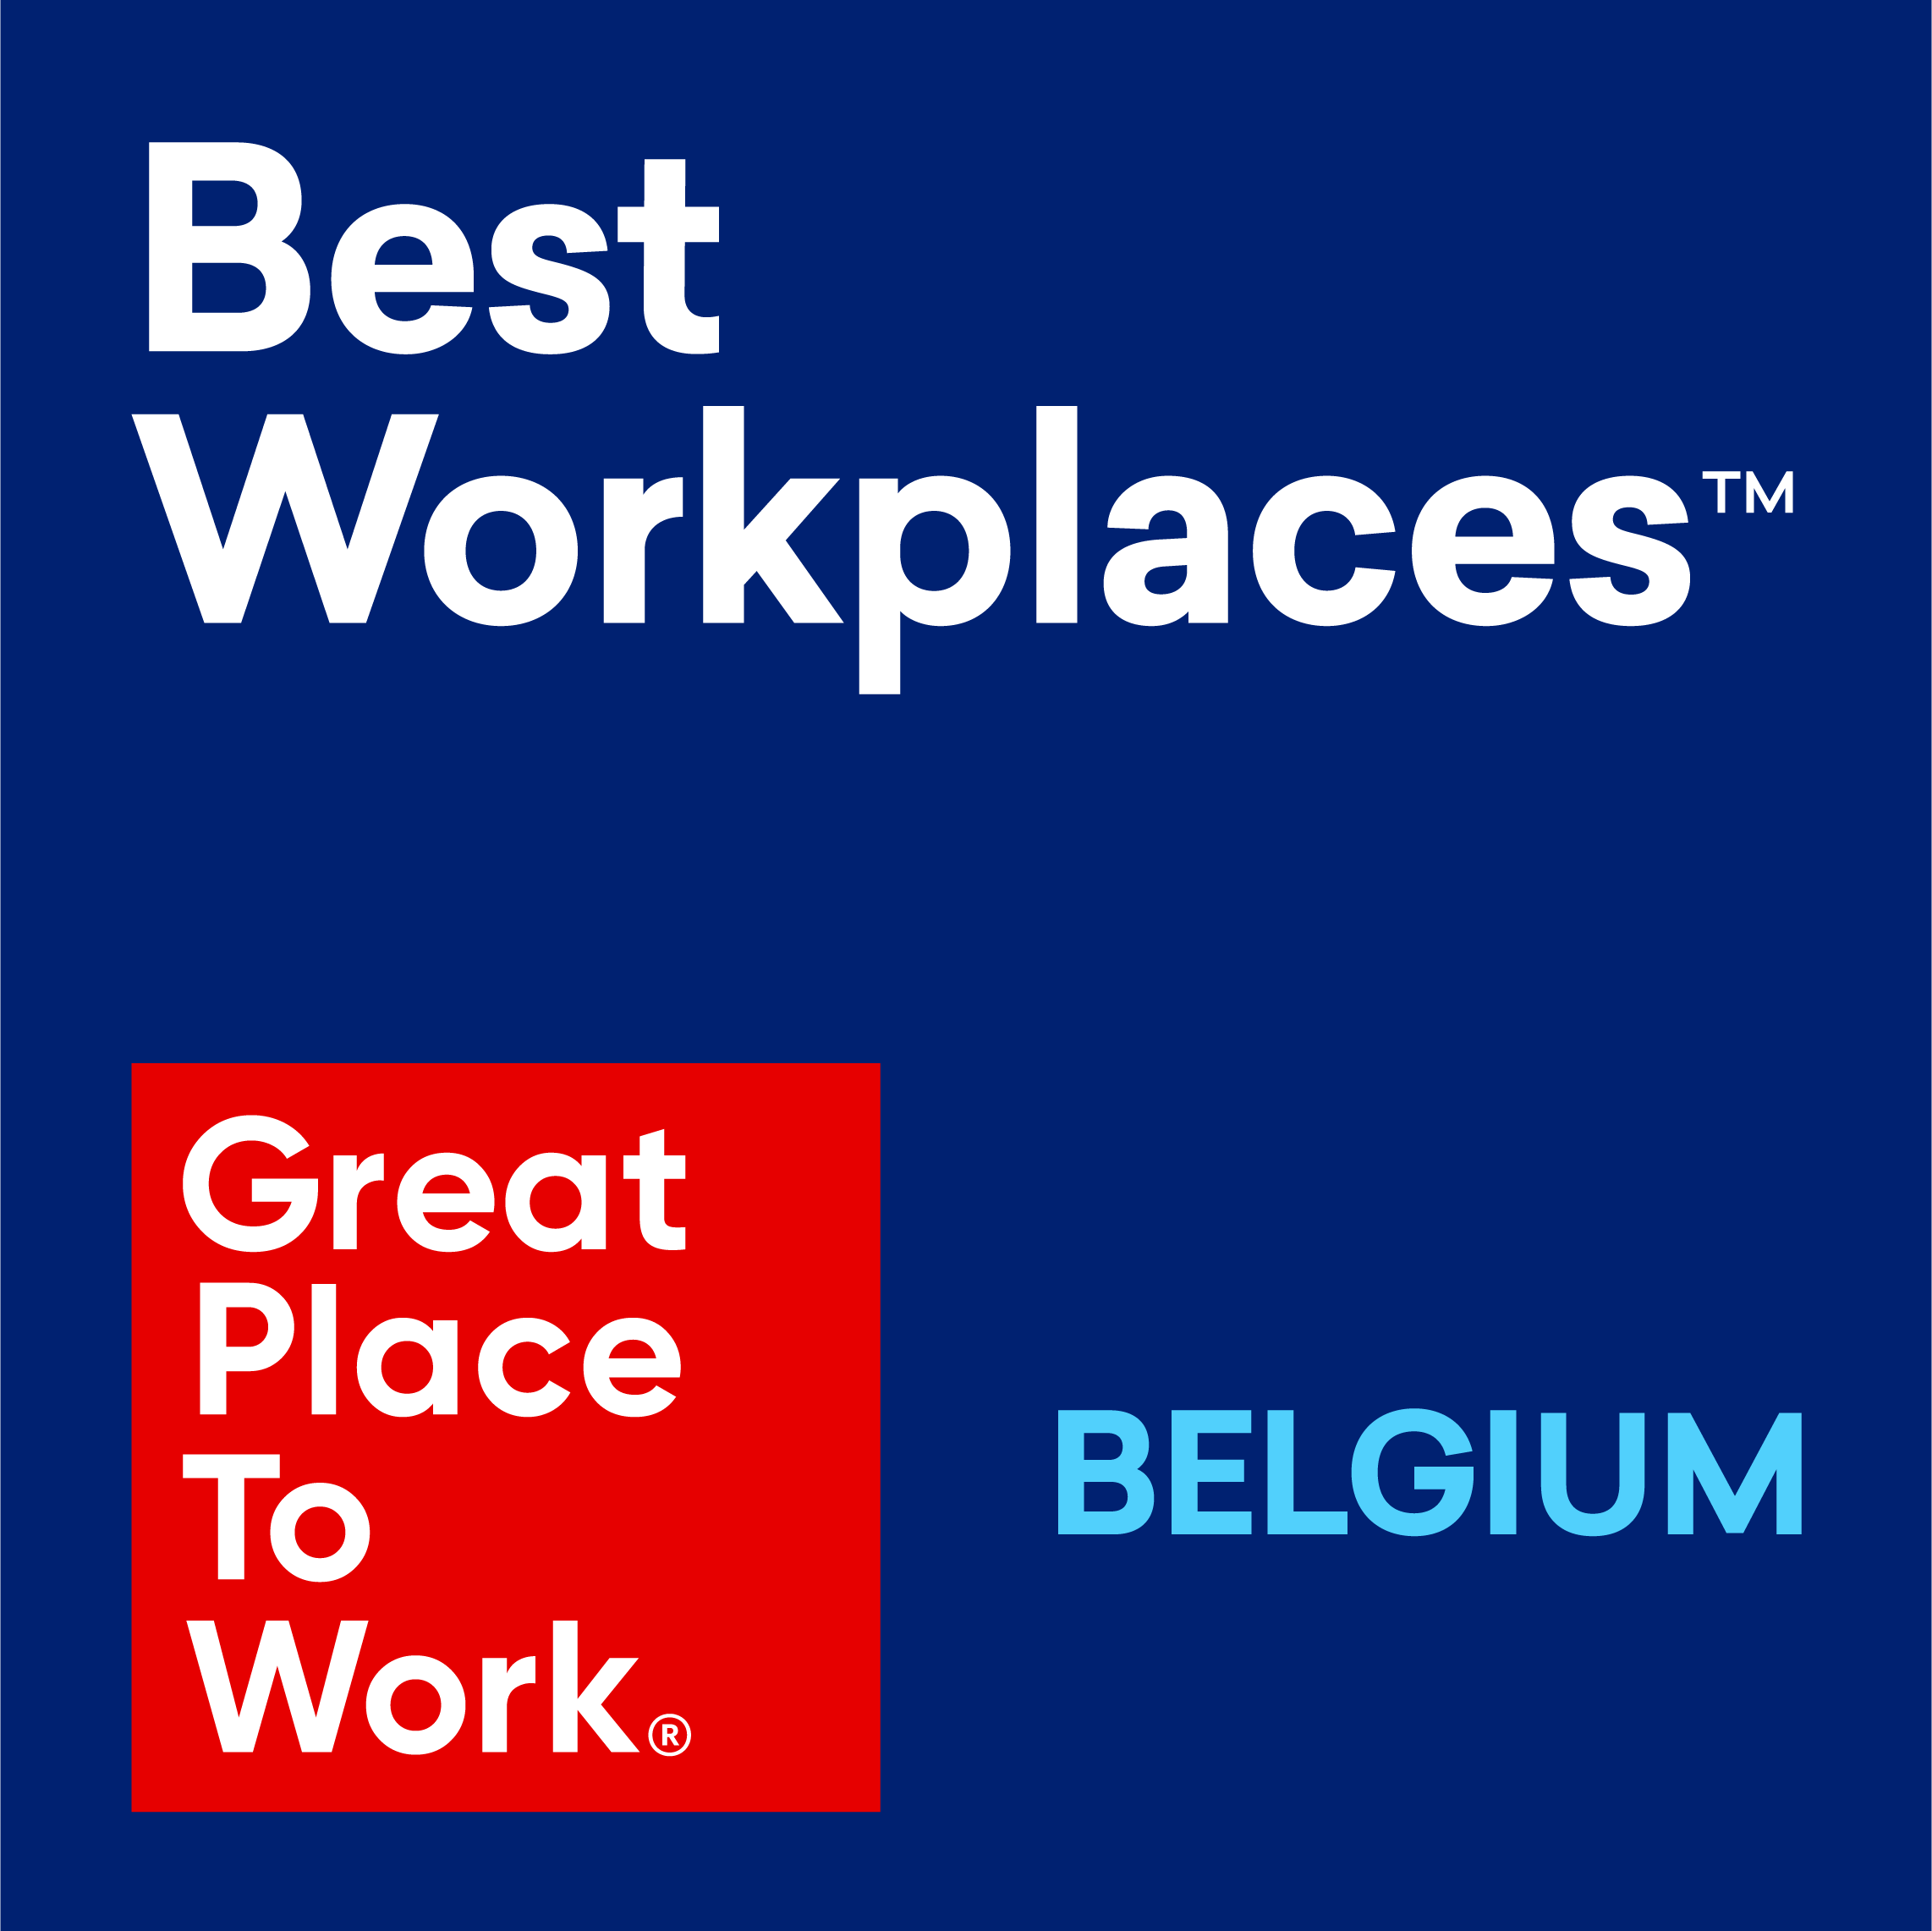 Best Workplaces BELGIUM WITHOUT DATE